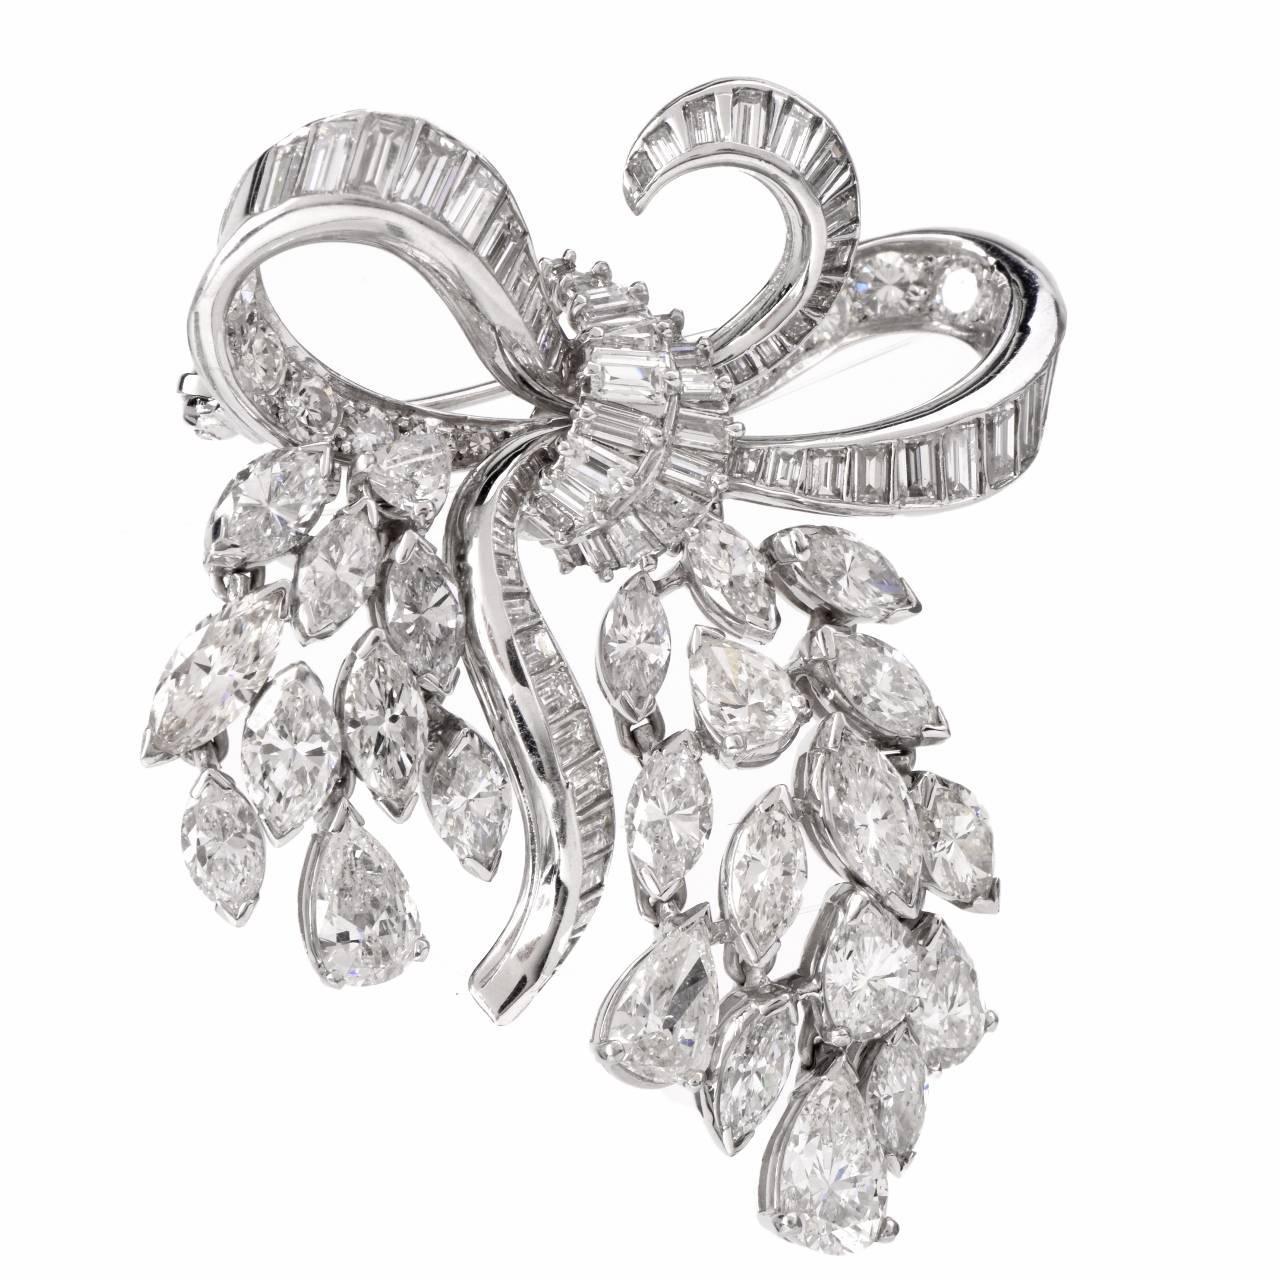 Tiffany and Co. Diamond Platinum Ribbon Bow Brooch For Sale at 1stdibs